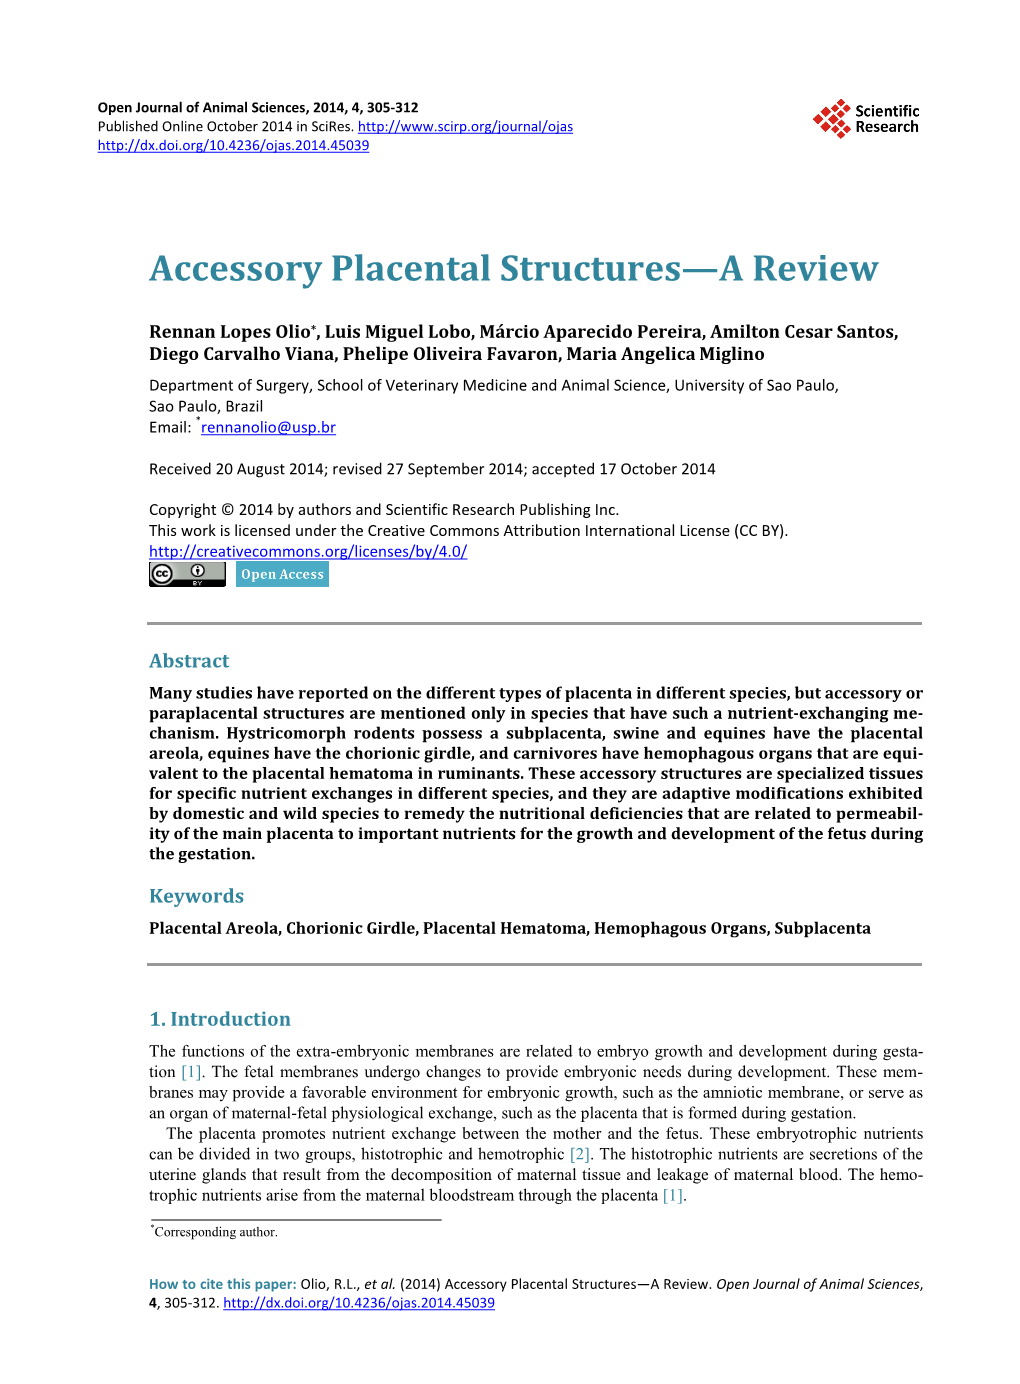 Accessory Placental Structures—A Review